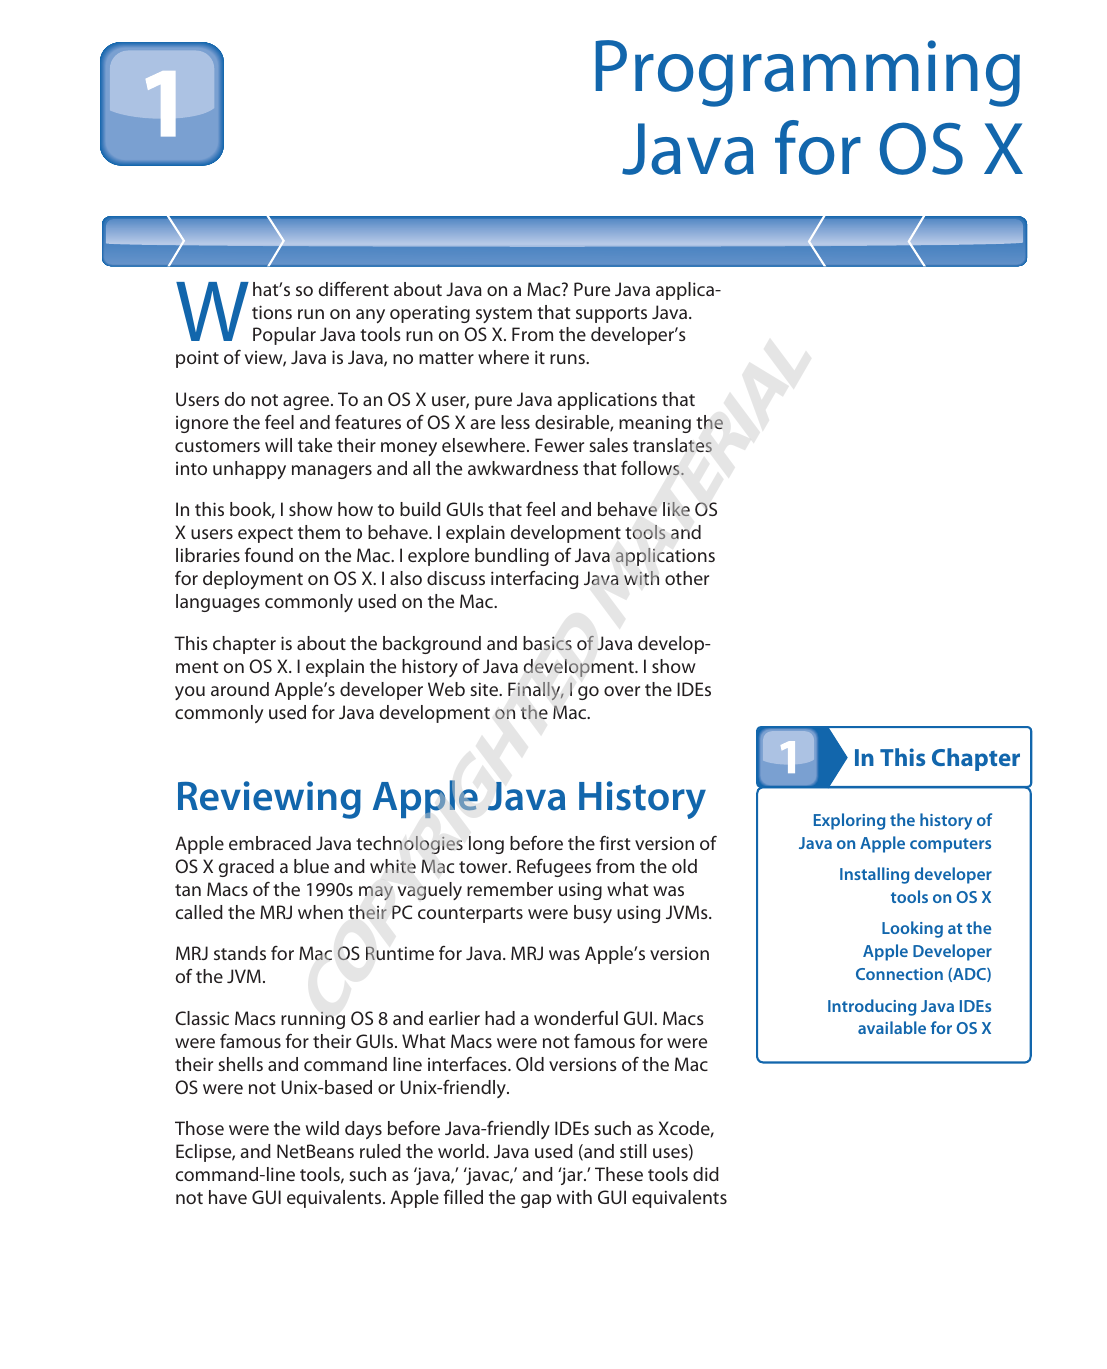 what is java used for on my mac